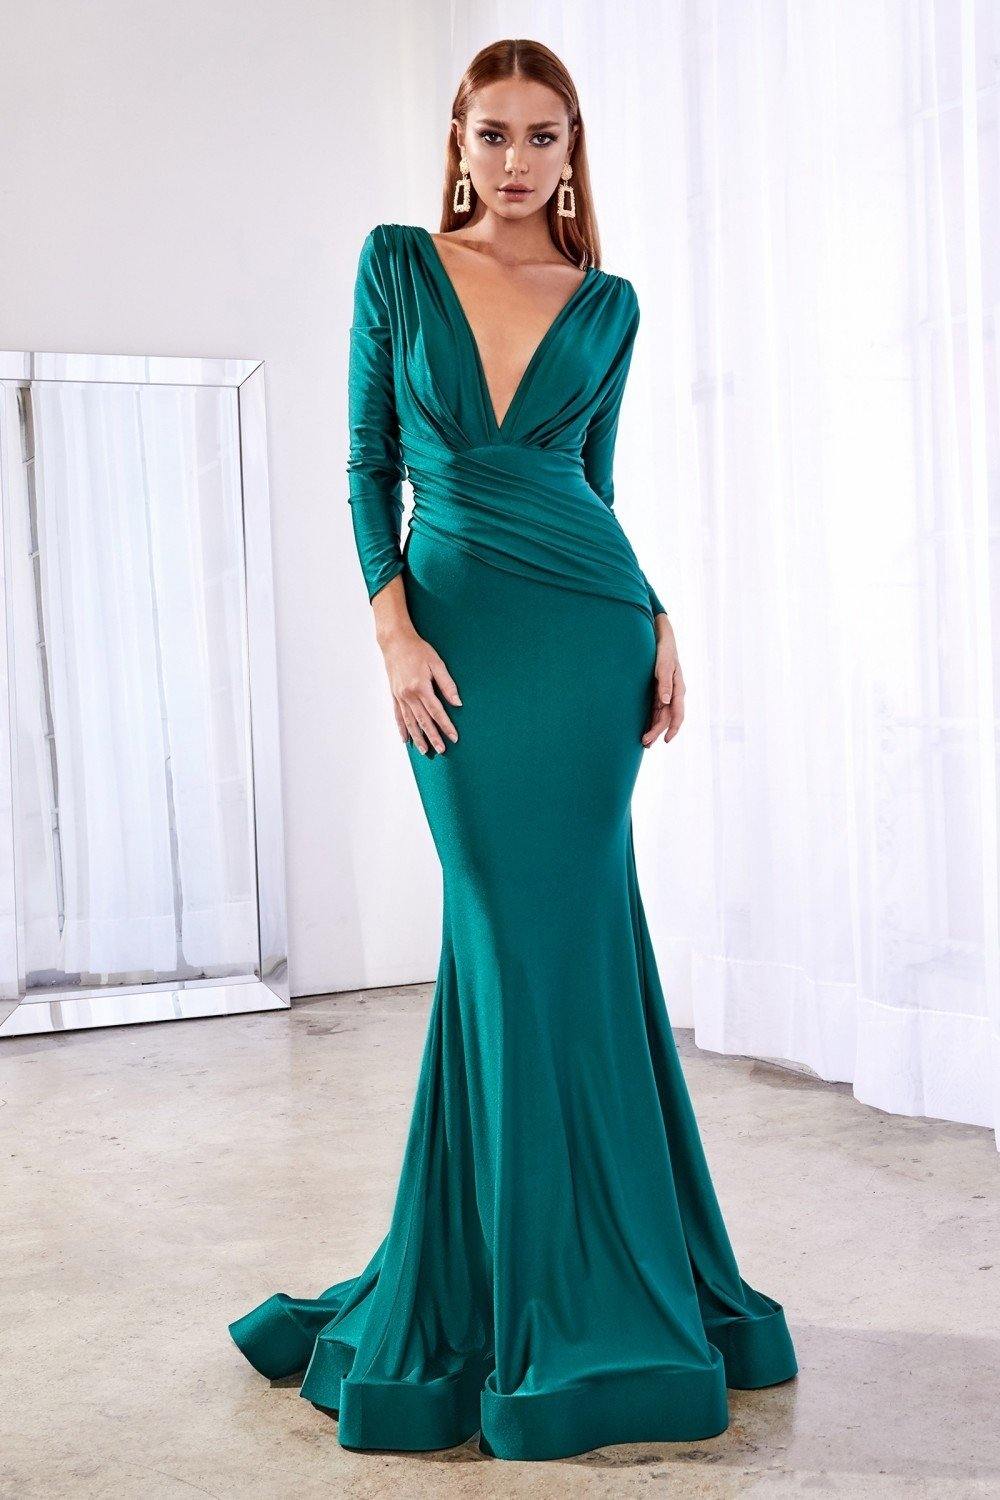 Cinderella Divine CD0168 Long Sleeve Fitted Formal Dress for $169.0 ...